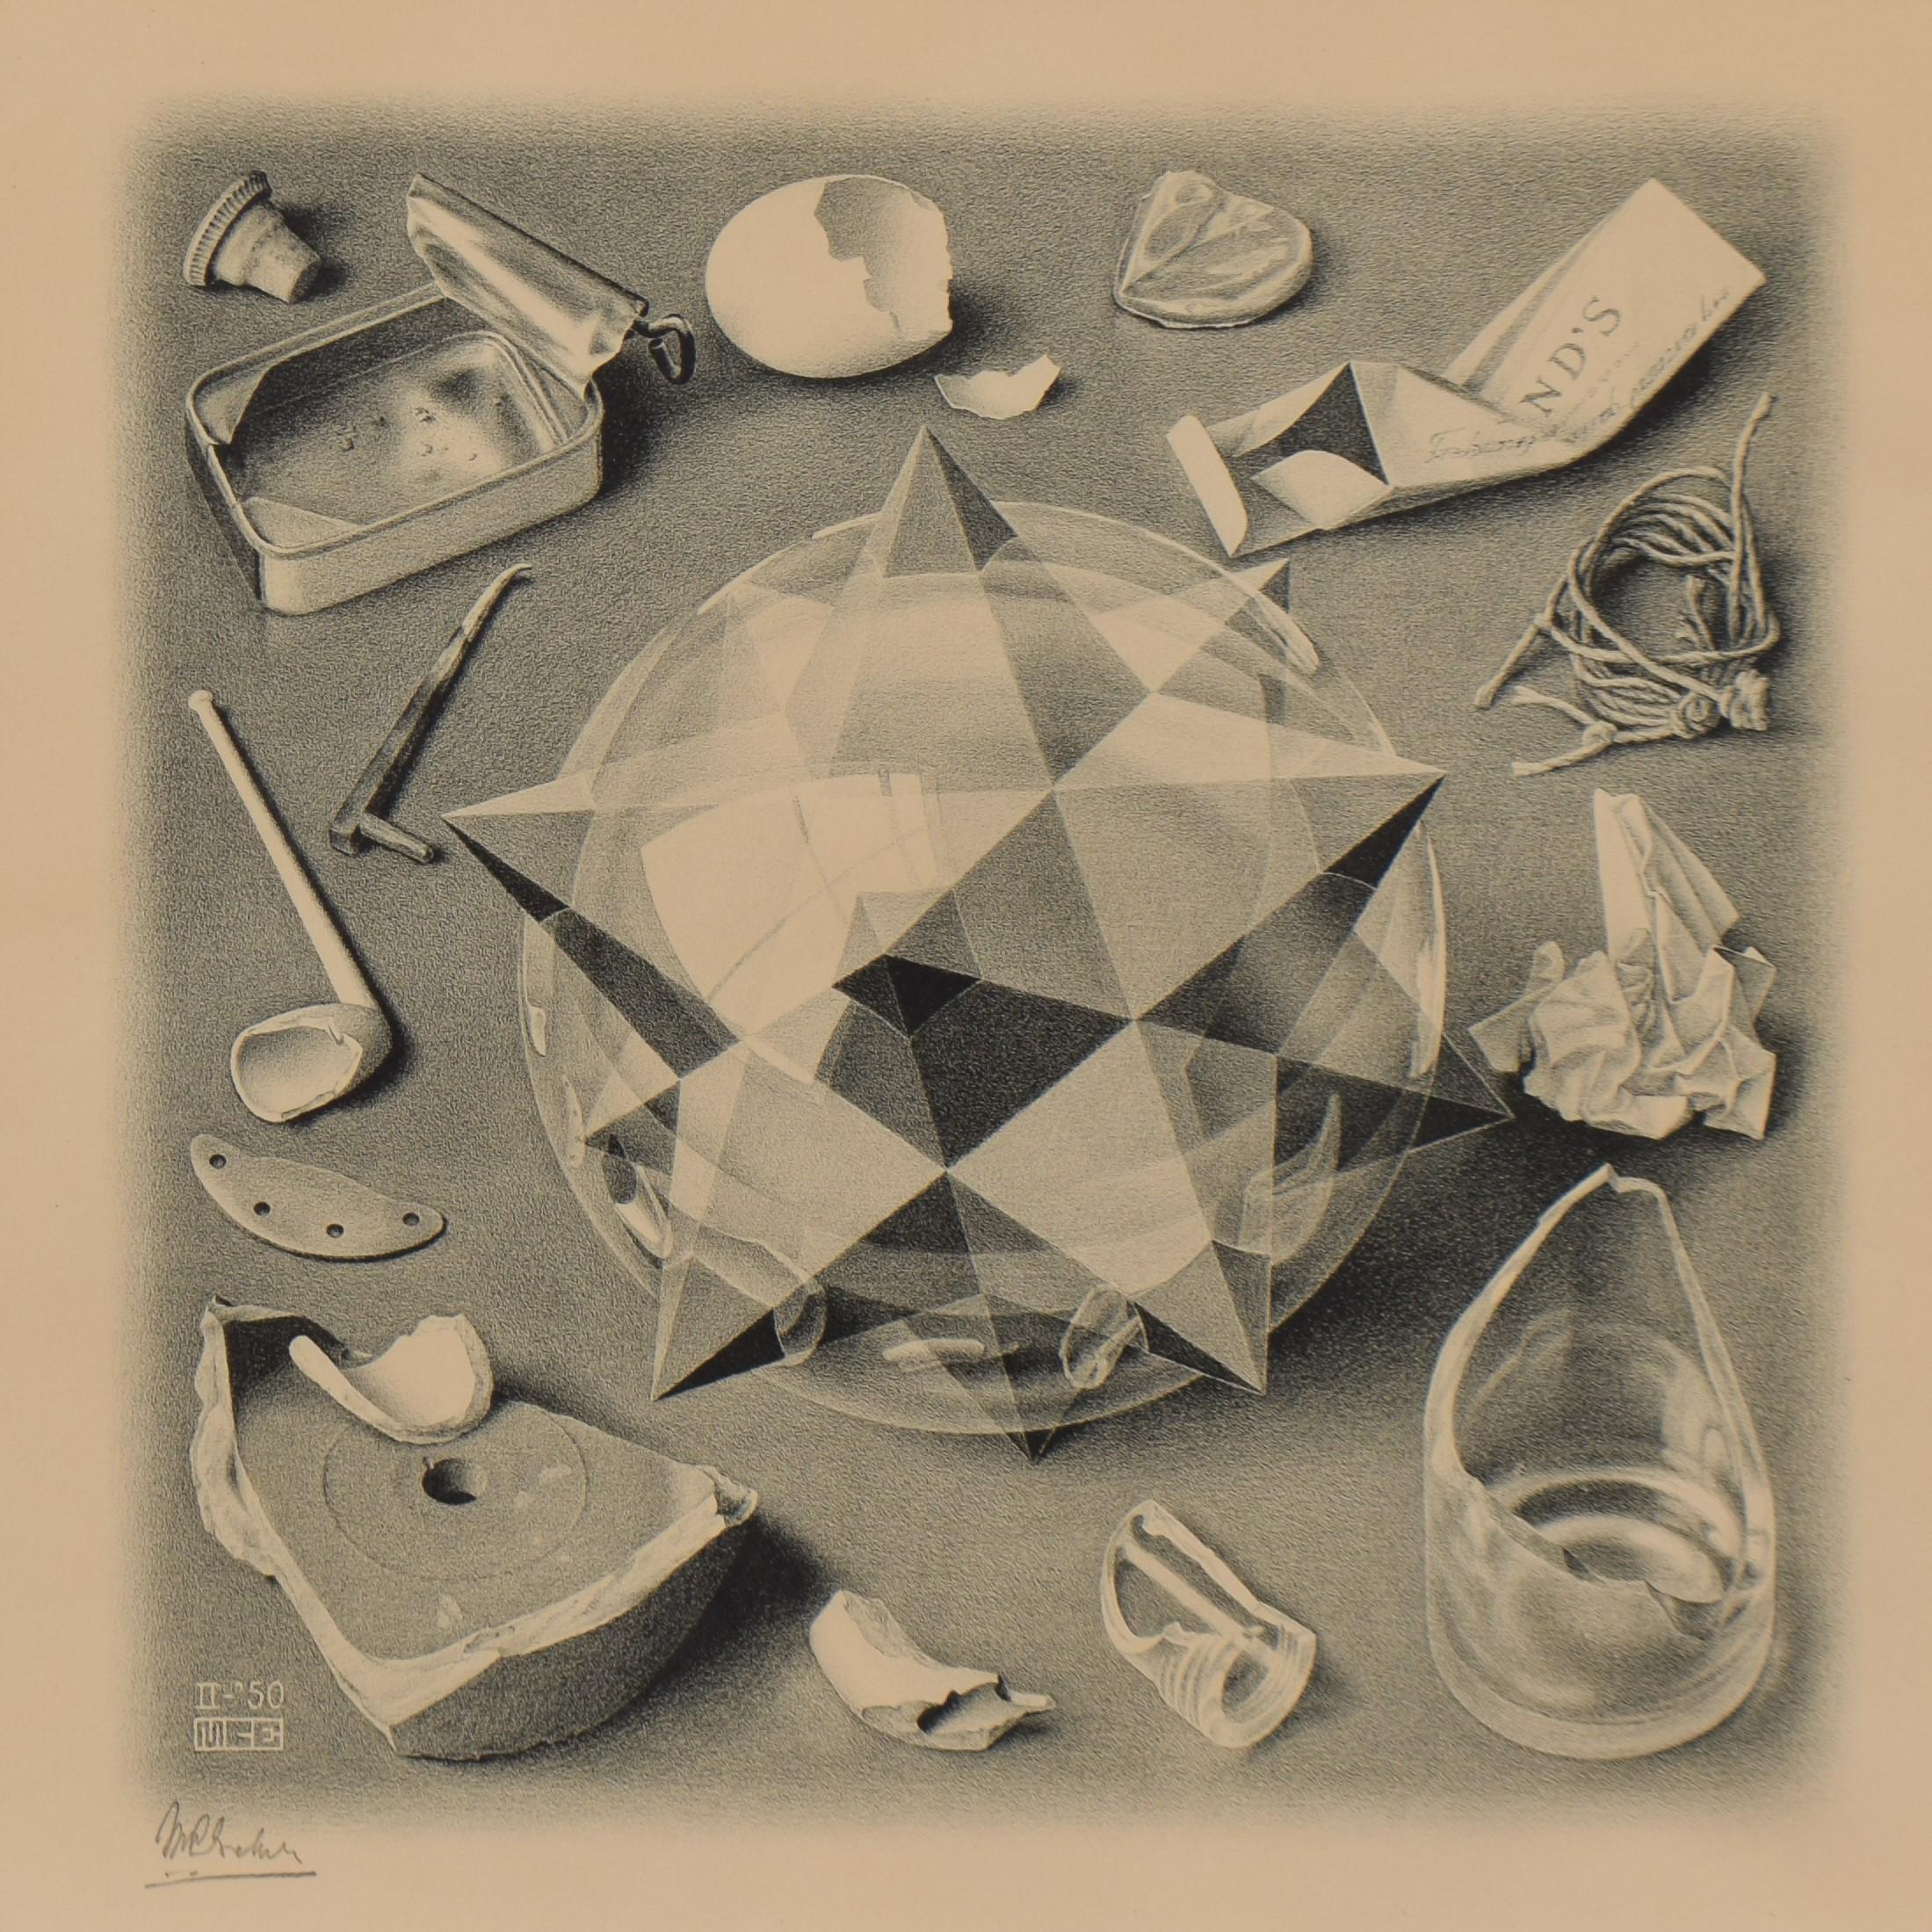 Order and Chaos - Dutch Artist Graphic Litho Metamorphoses Perspective - Print by M.C. Escher